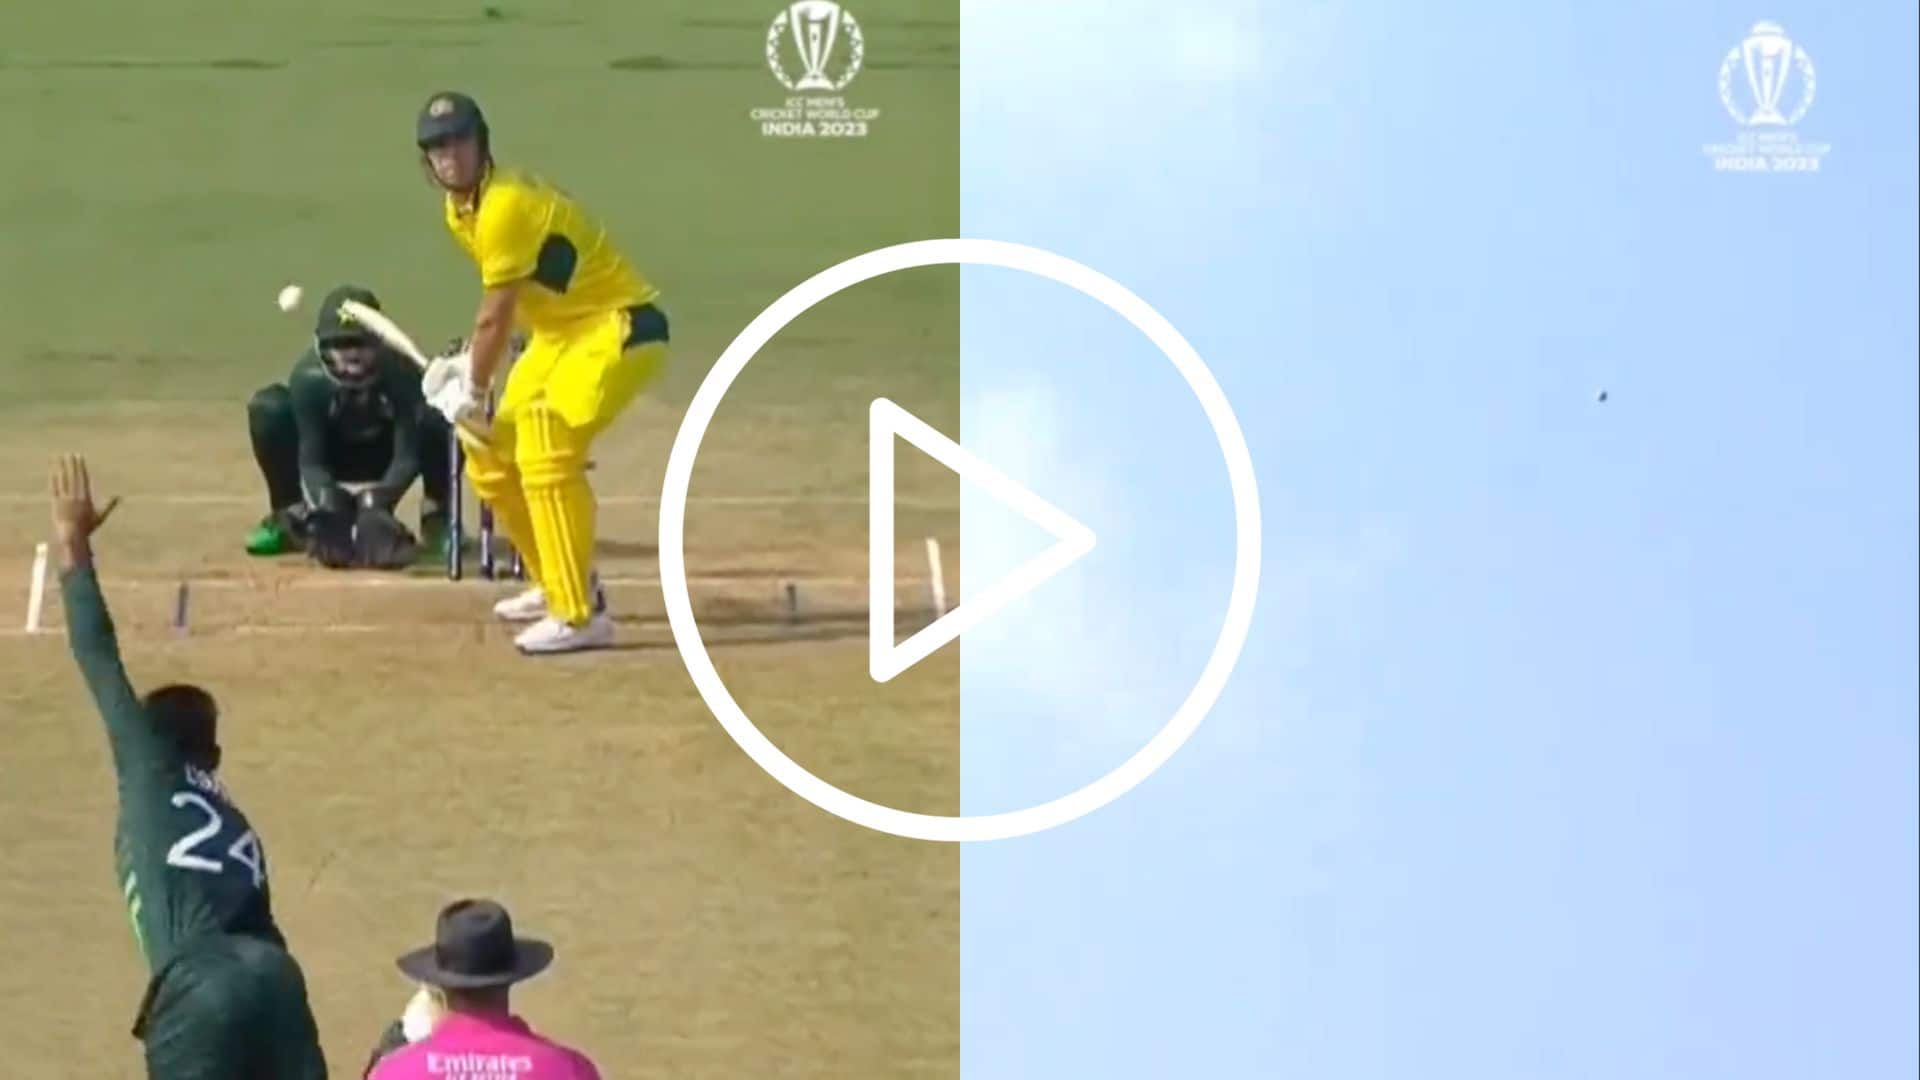 [Watch] Usama Mir ‘Smoked’ By Mitchell Marsh For An Enormous Six Into The Roof